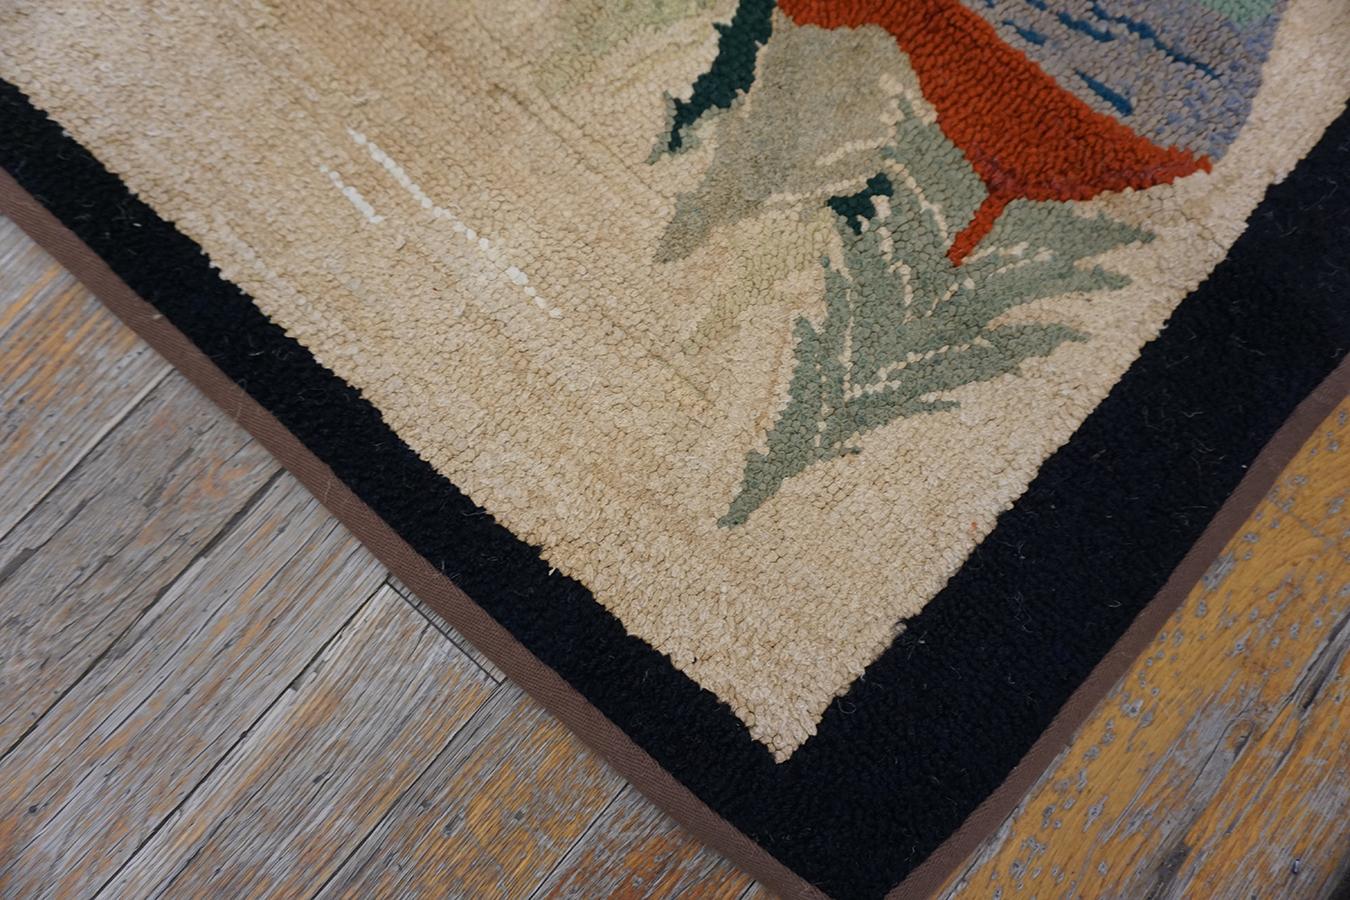 Antique American Hooked Rug 2' 0